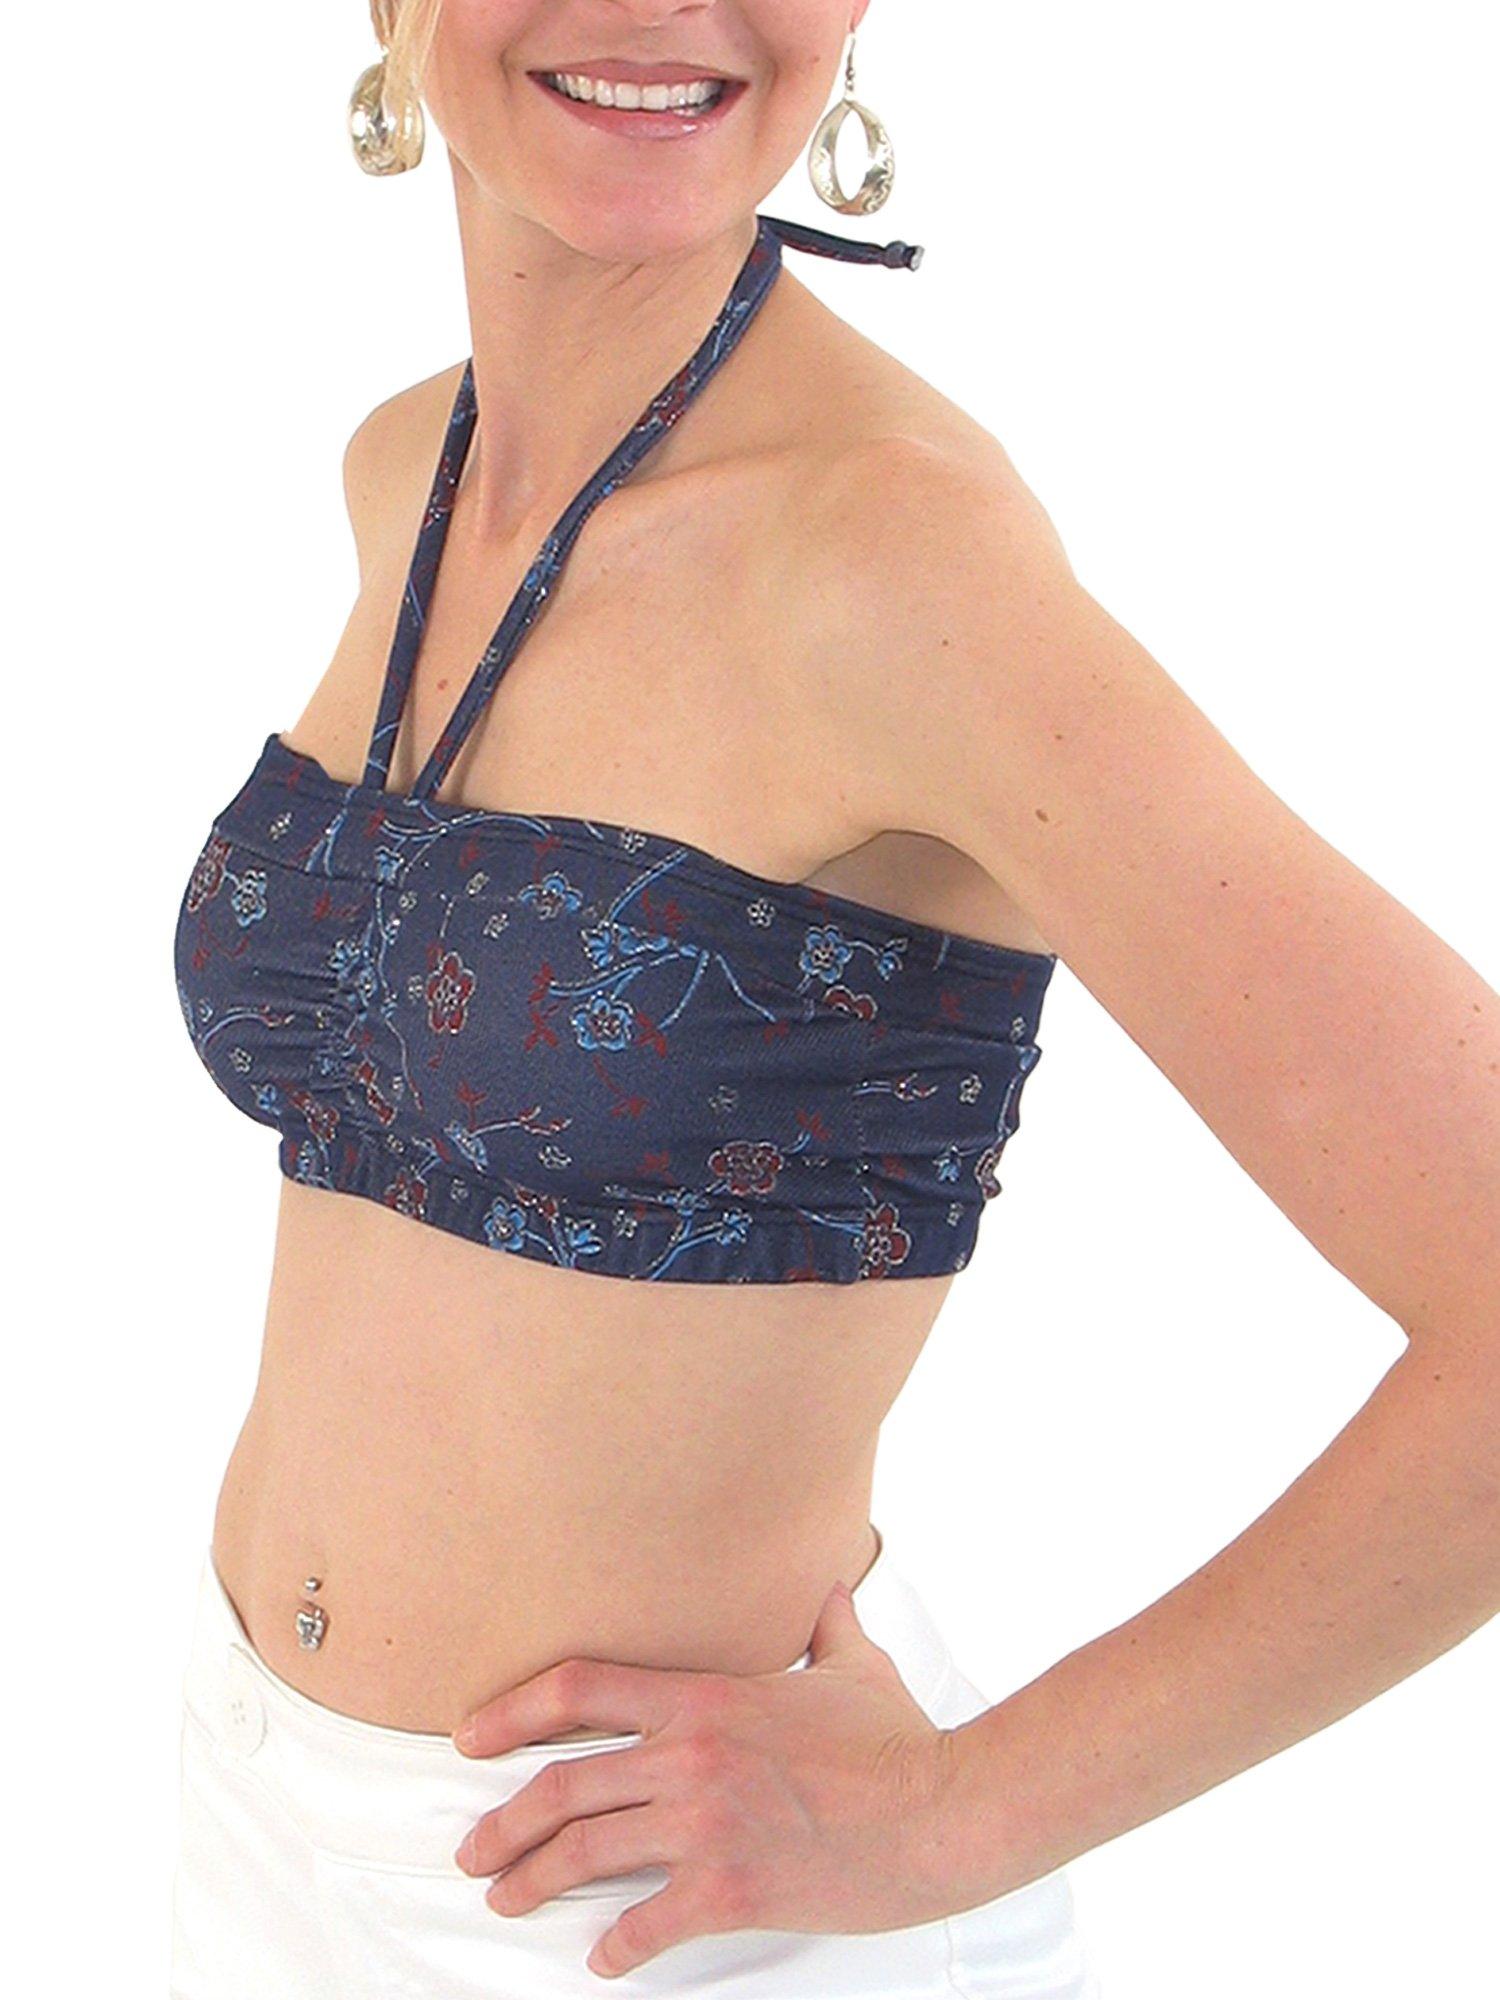 Cuffed Bandeau Sewing Pattern Download - Sew Daily